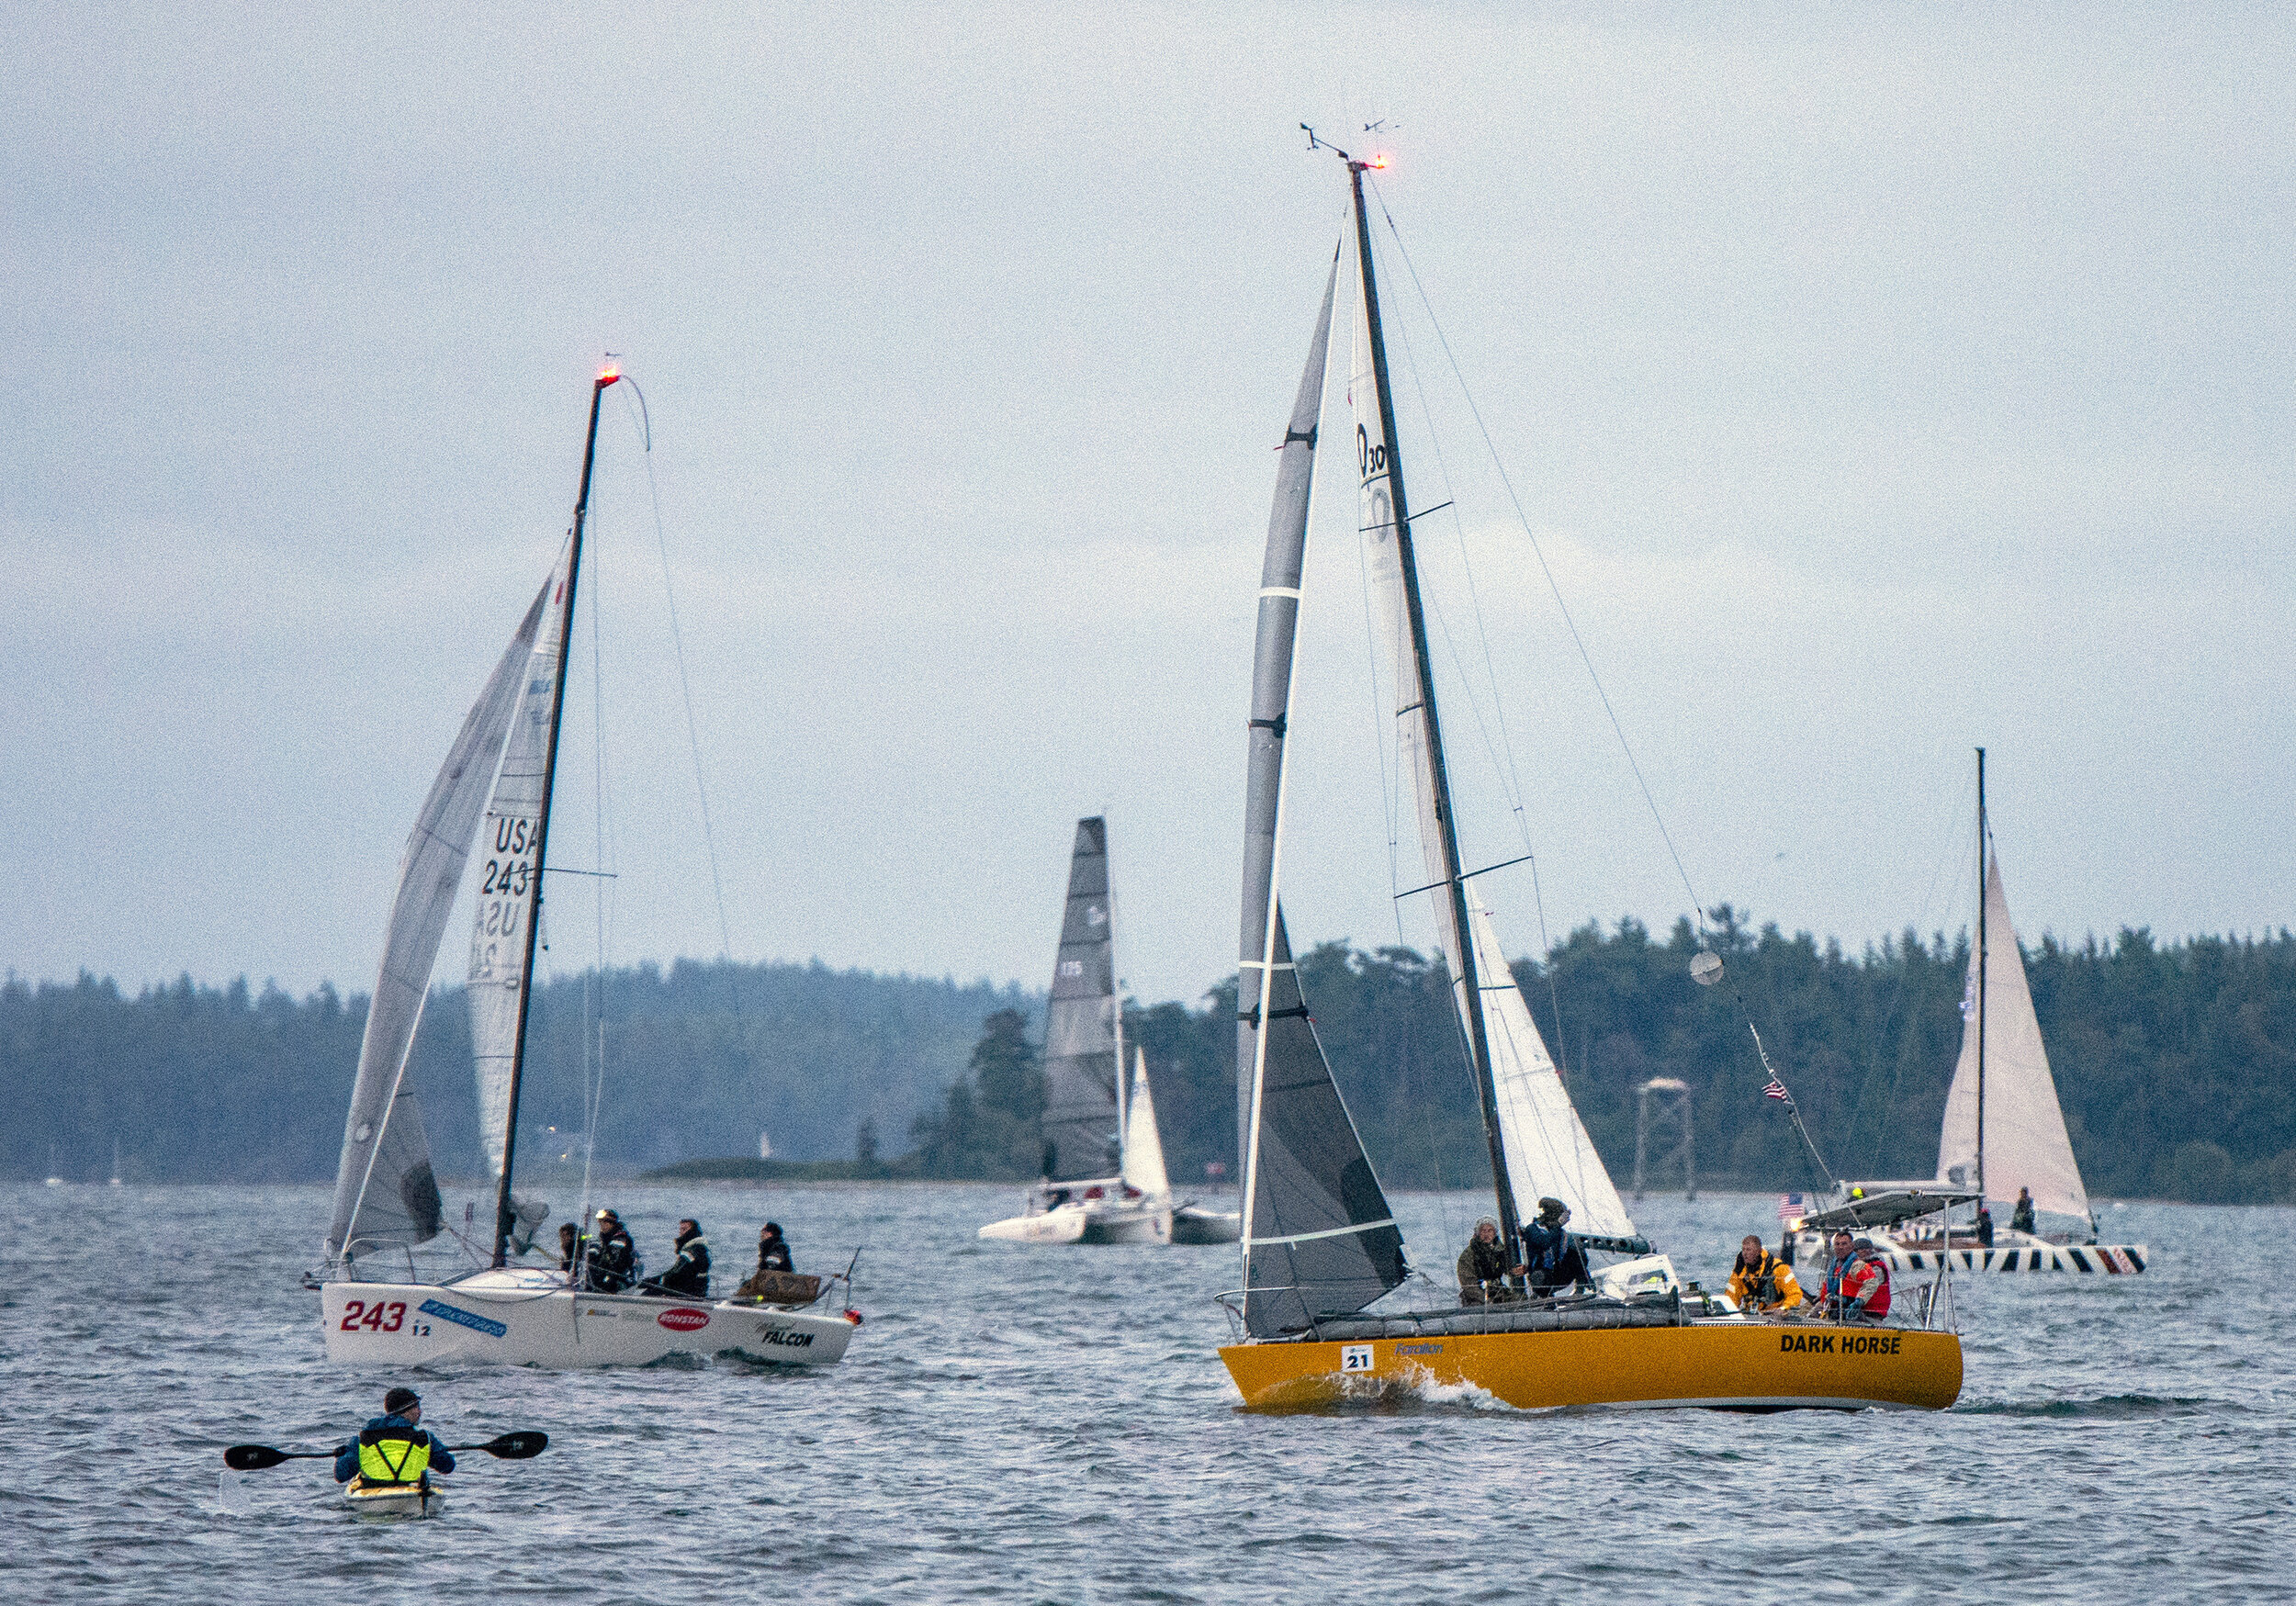  Racing vessels prepare to begin the Race to Alaska on Monday, June 3, 2019, in Port Townsend, WA.  